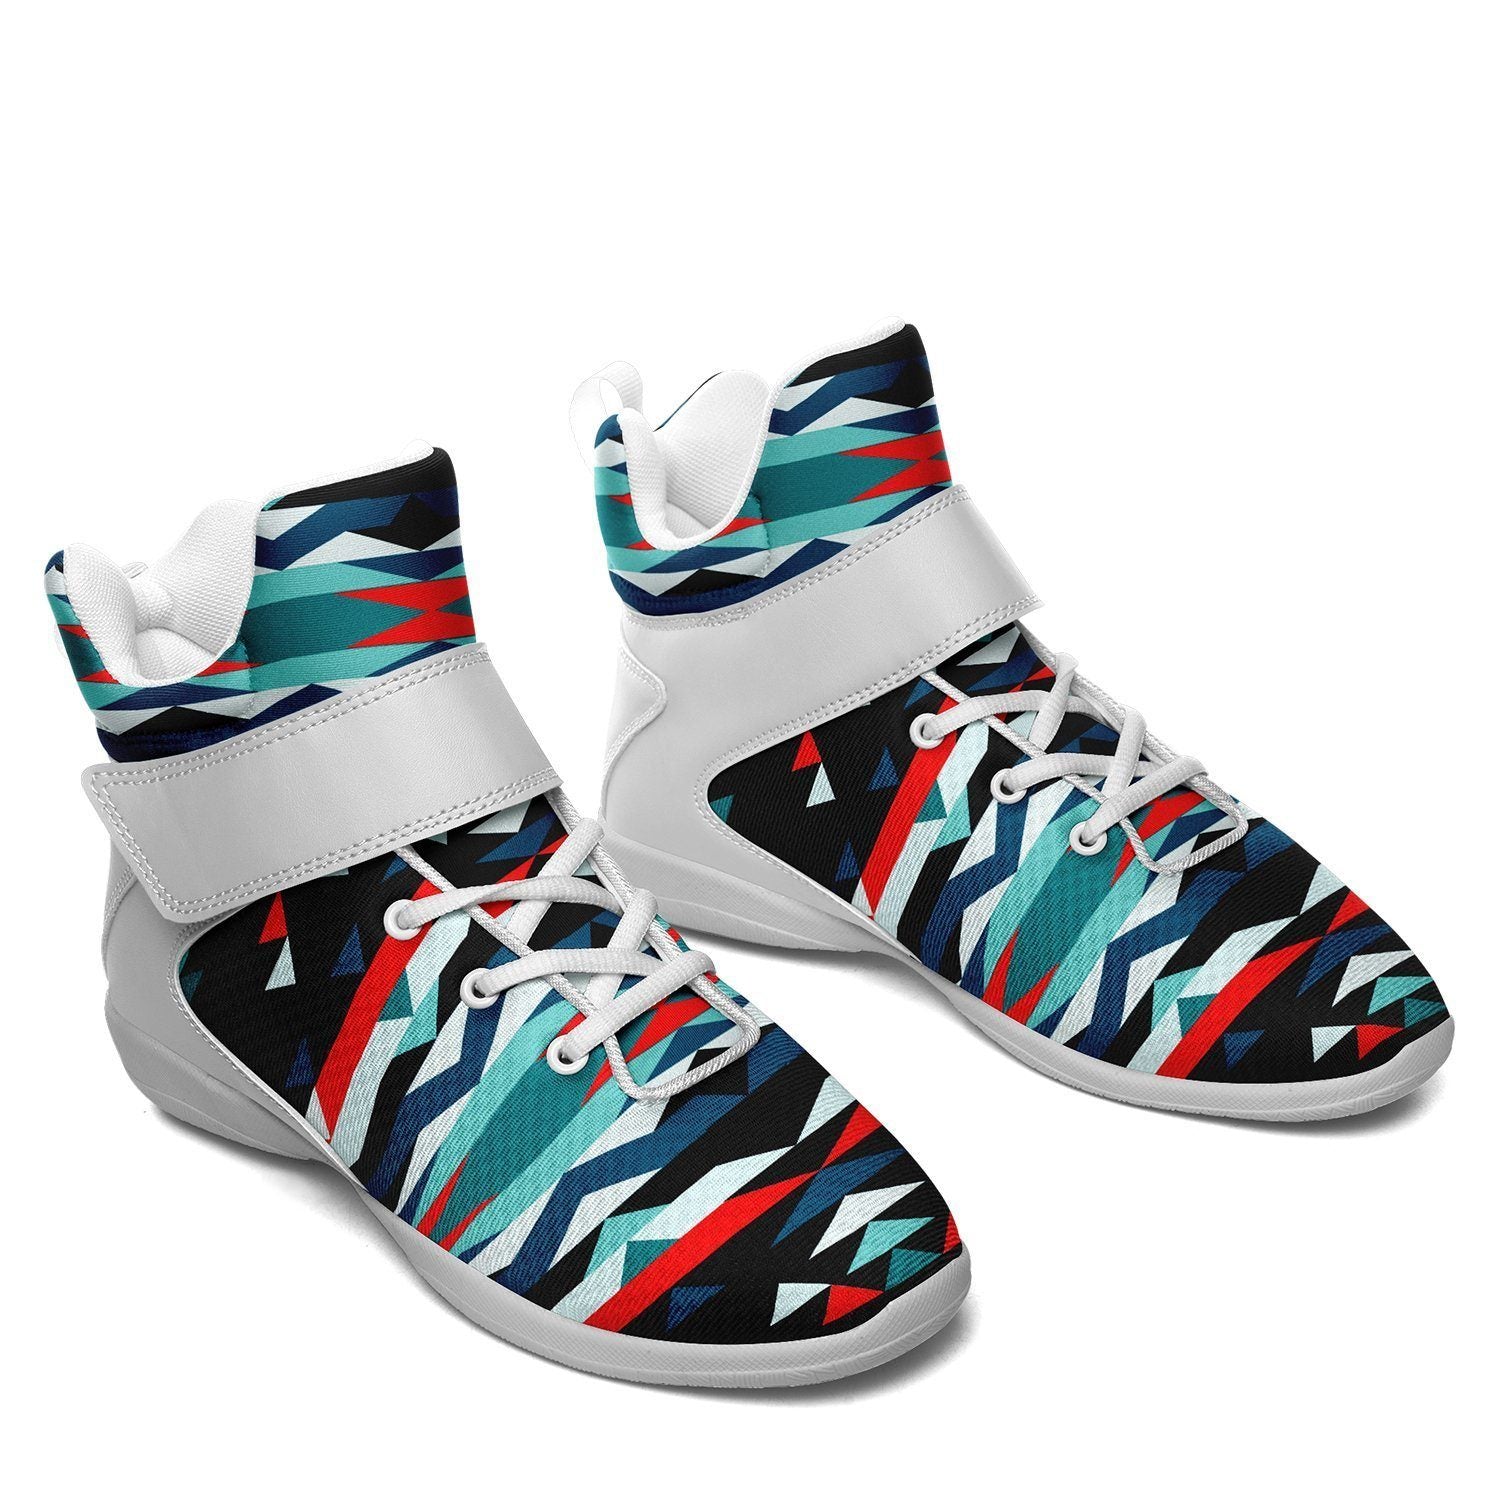 Visions of Peaceful Nights Ipottaa Basketball / Sport High Top Shoes - White Sole 49 Dzine 